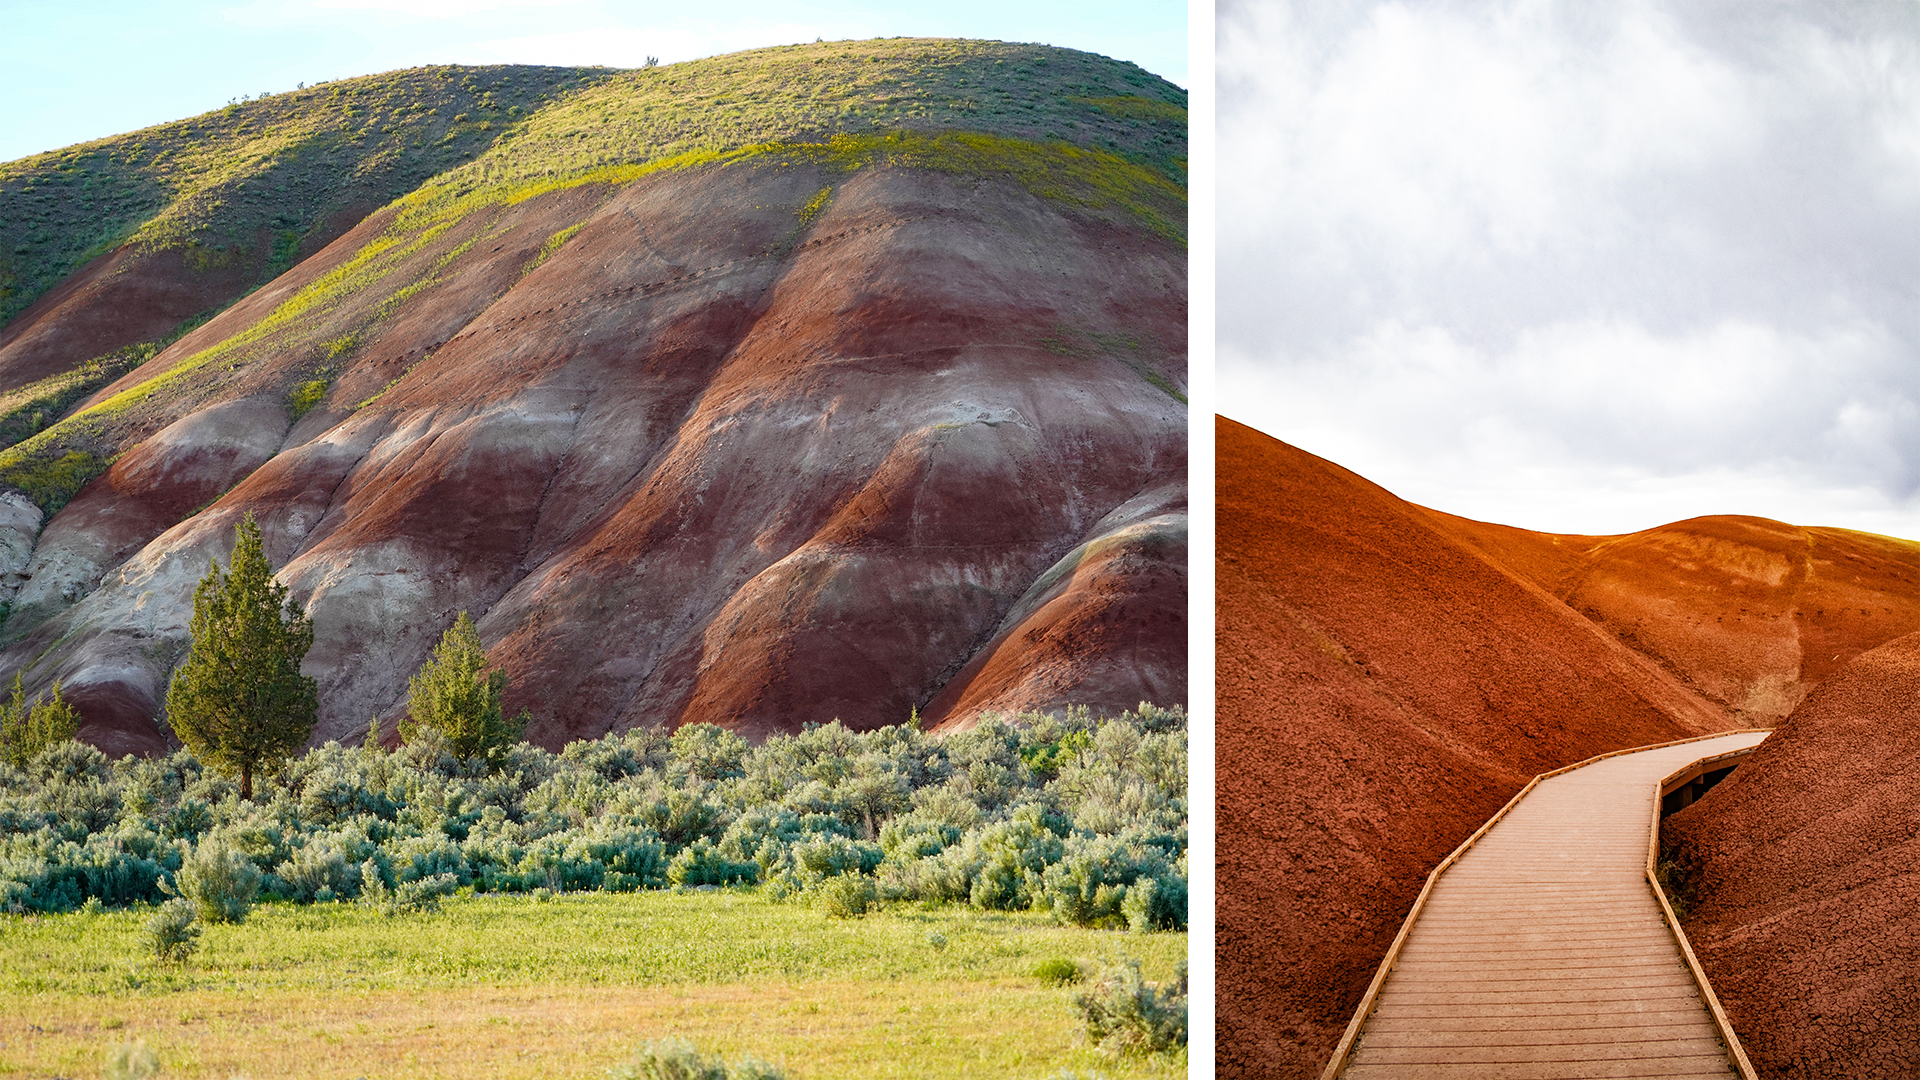 Painted Hills at the John Day Fossil Beds, and a wooden walkway through red dirt.